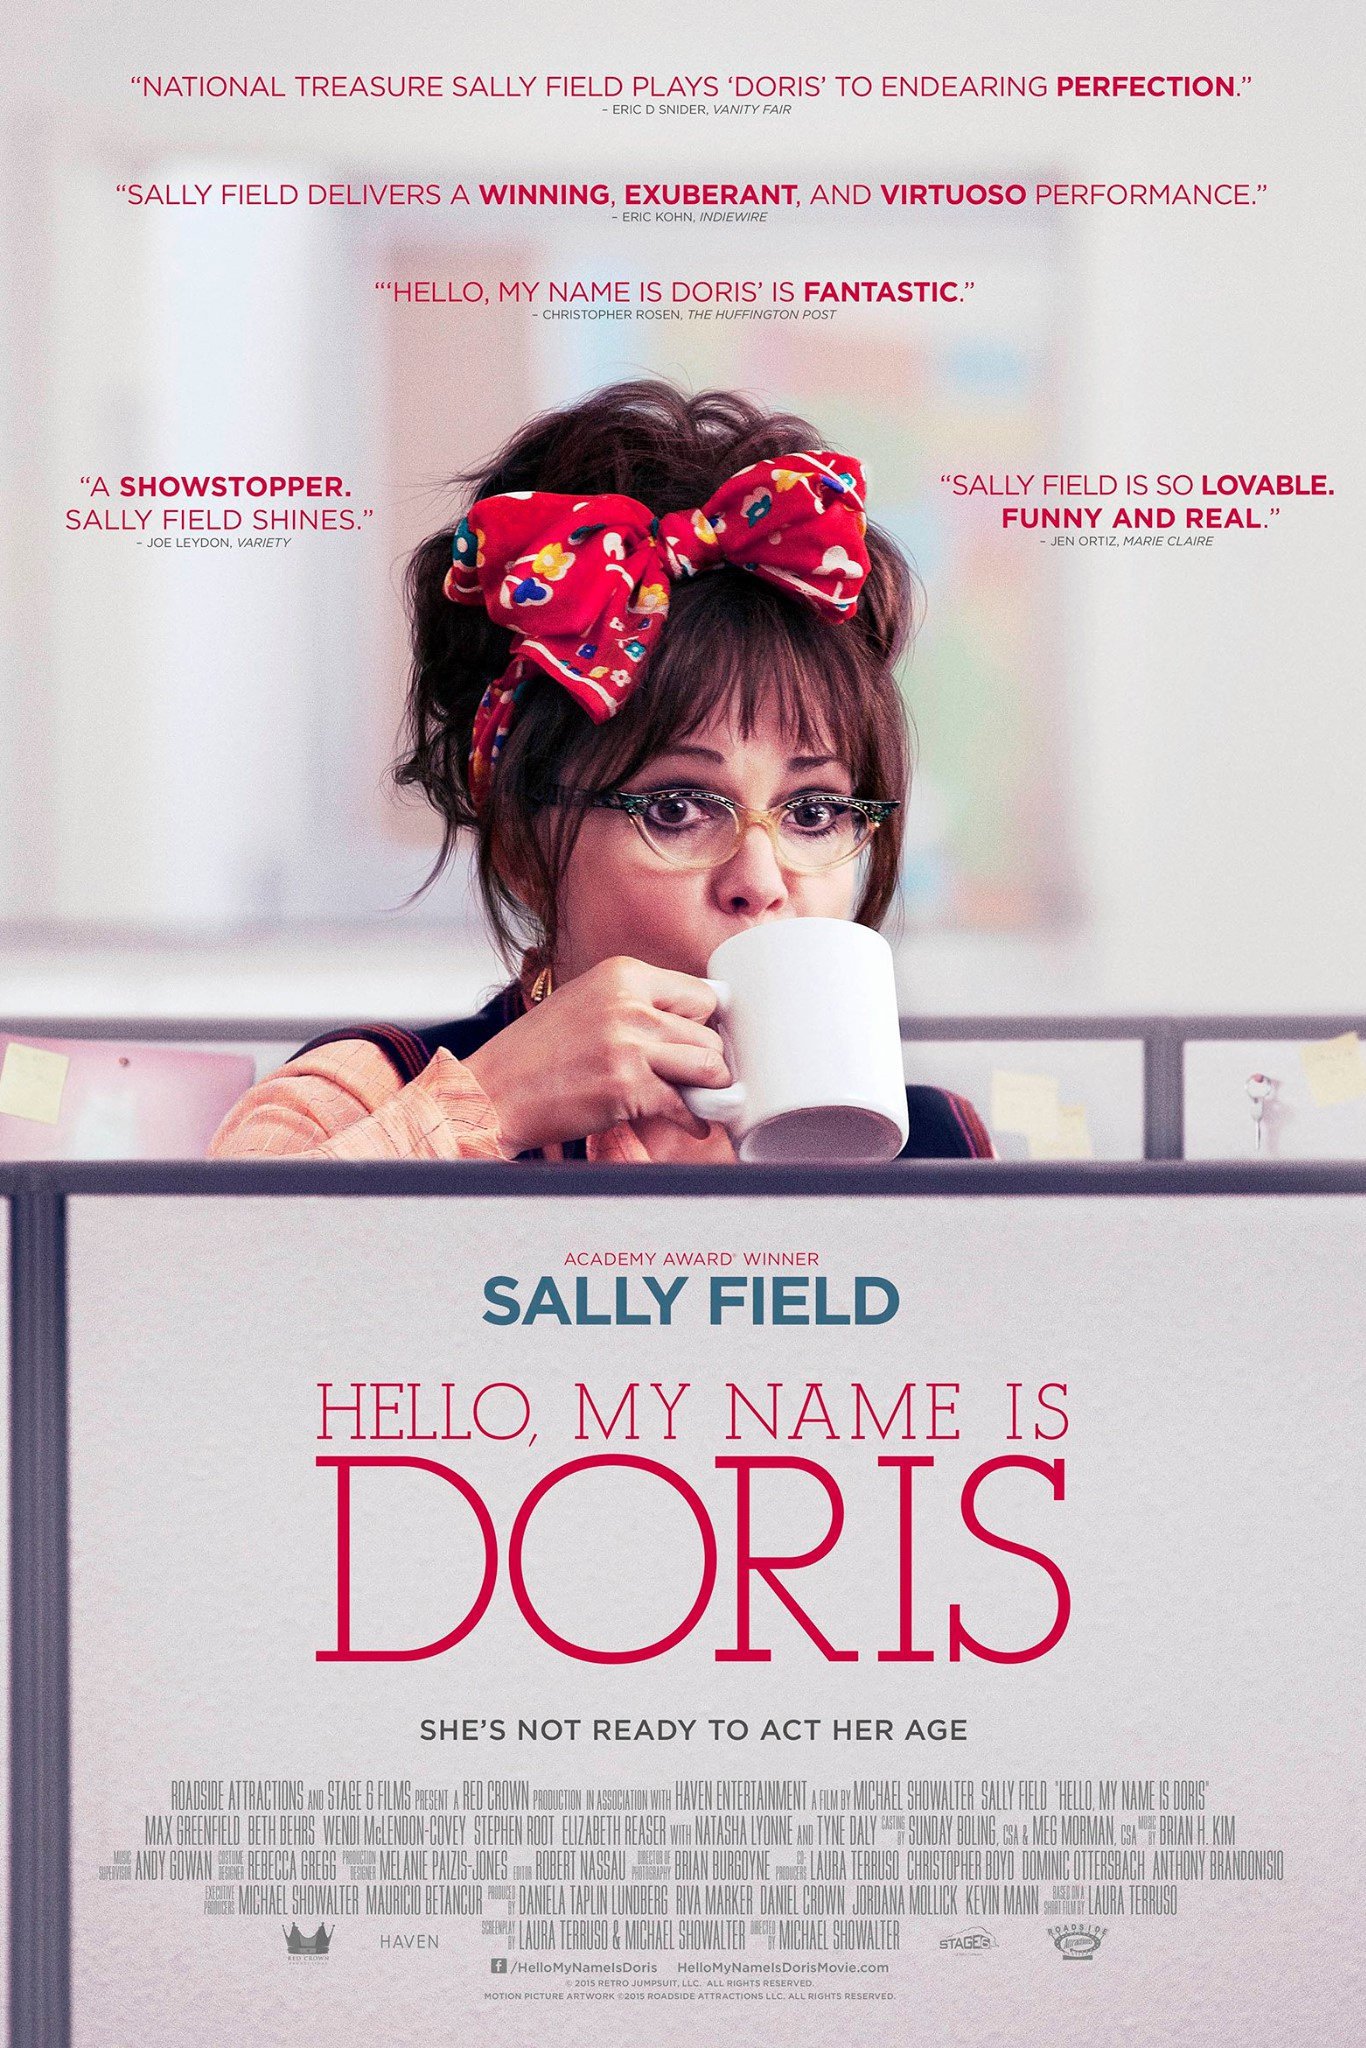 Poster for the movie "Hello, My Name Is Doris"